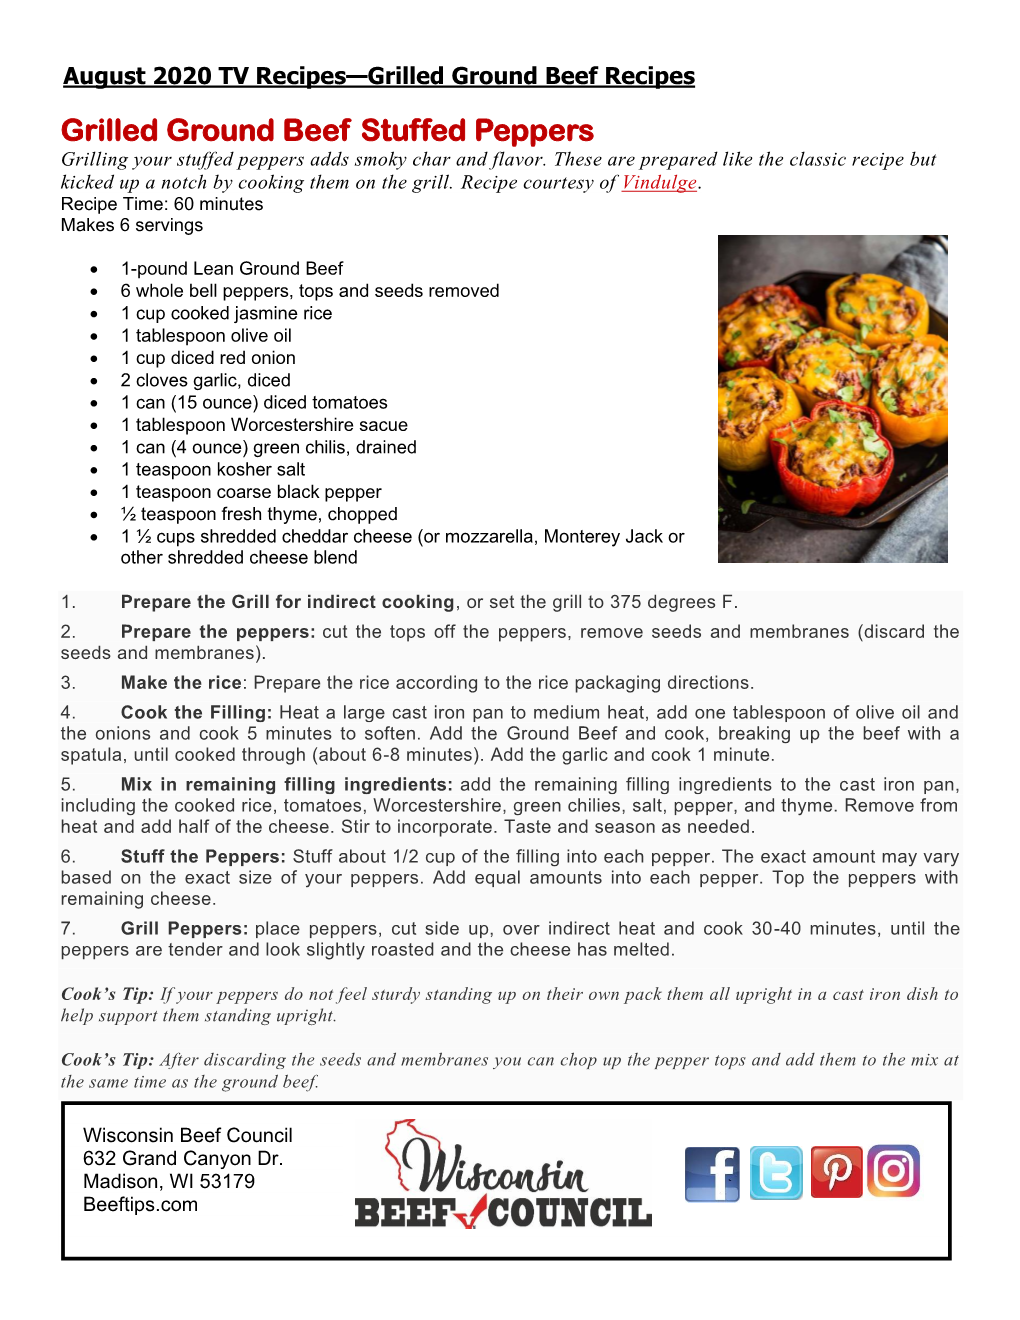 Grilled Ground Beef Stuffed Peppers Grilling Your Stuffed Peppers Adds Smoky Char and Flavor